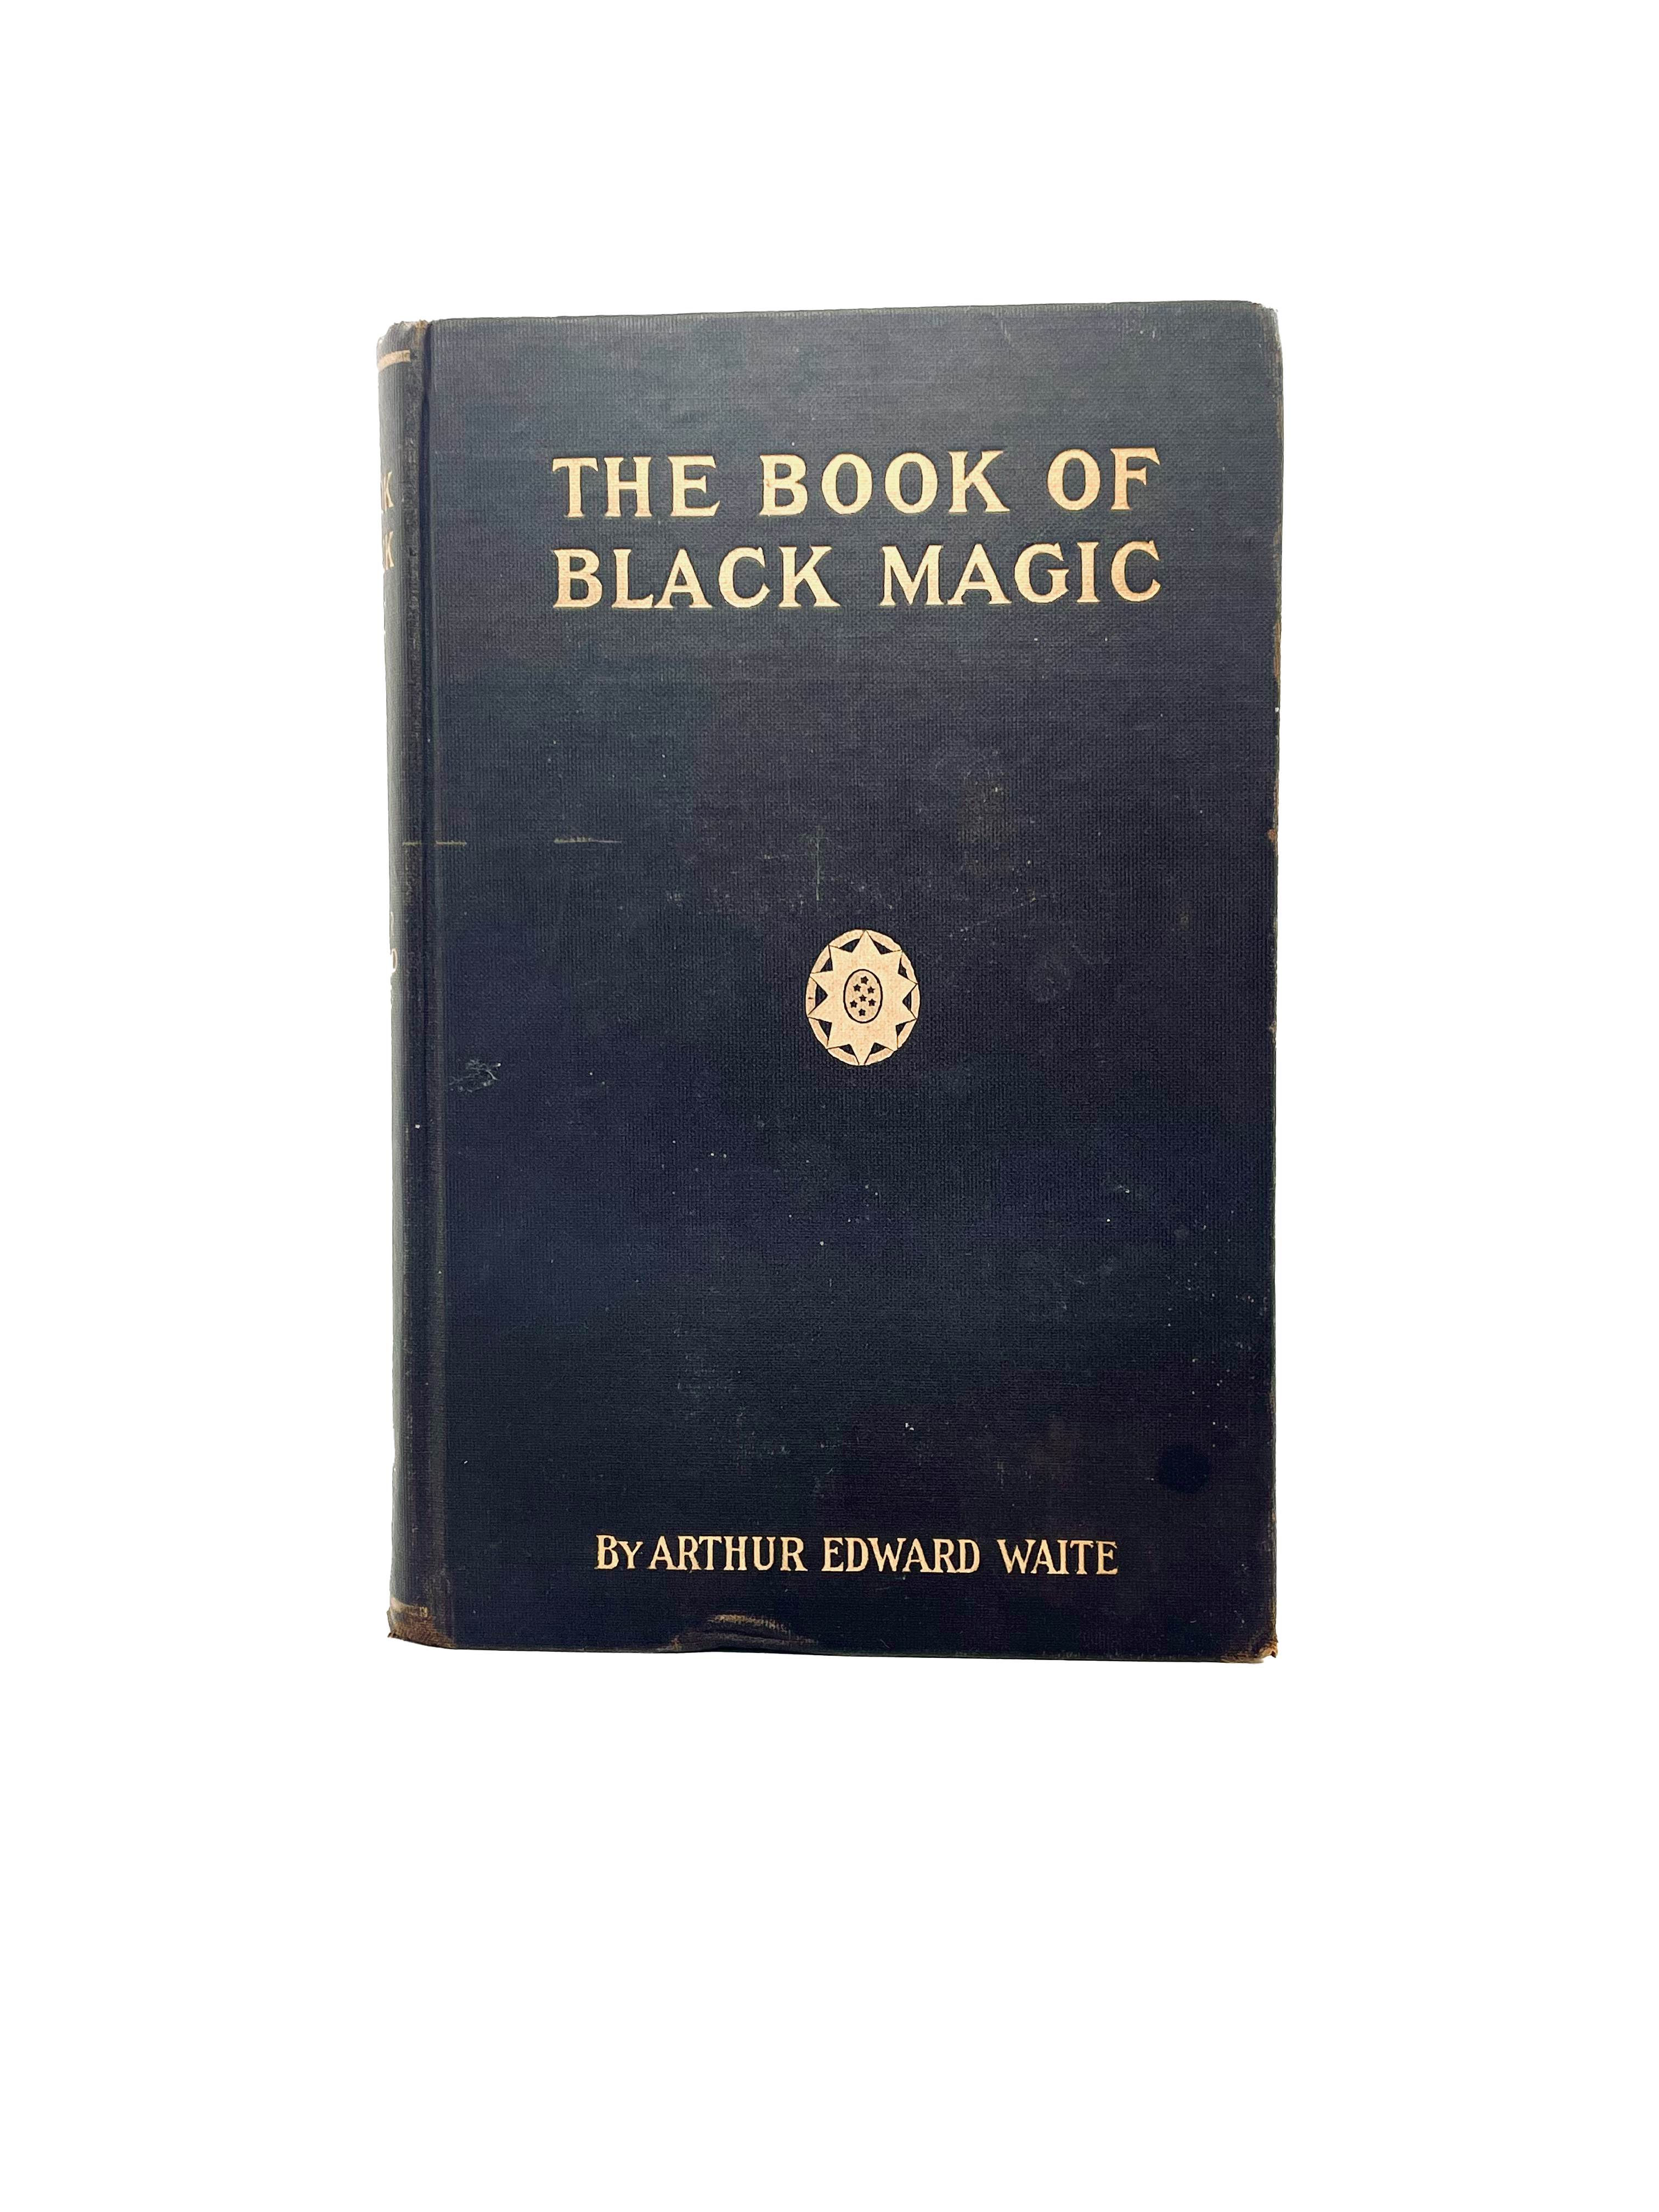 Book of BLACK MAGIC and Pacts – A. Edward Waite, London 1898